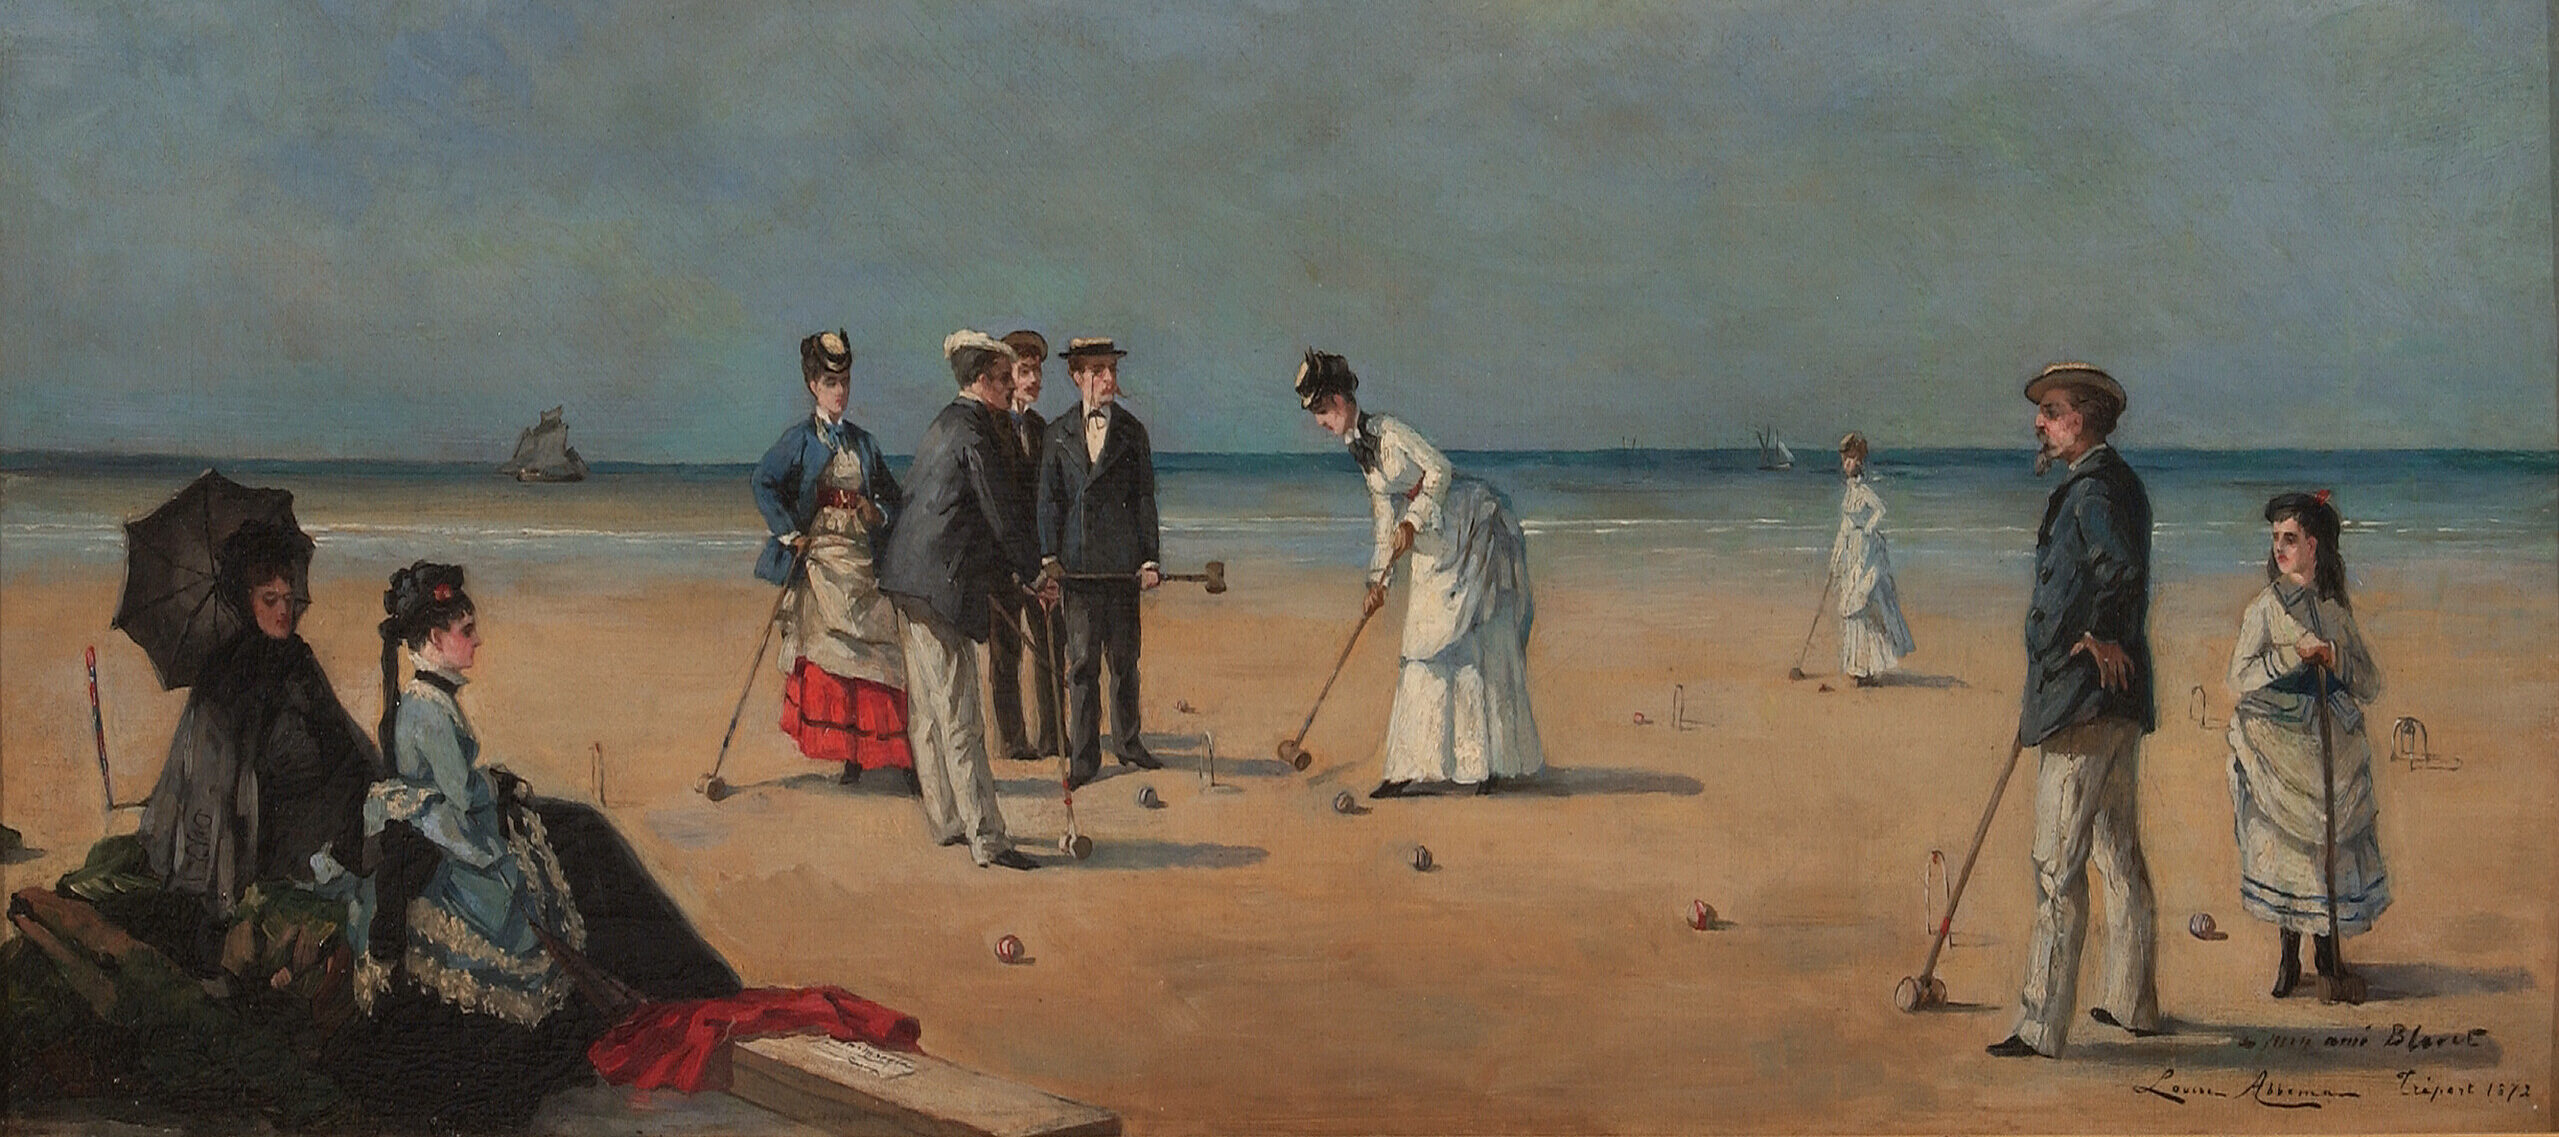 An oil painting of a group of light skinned men and women playing croquet on a beach wearing daytime suits and dresses from the late nineteenth century.